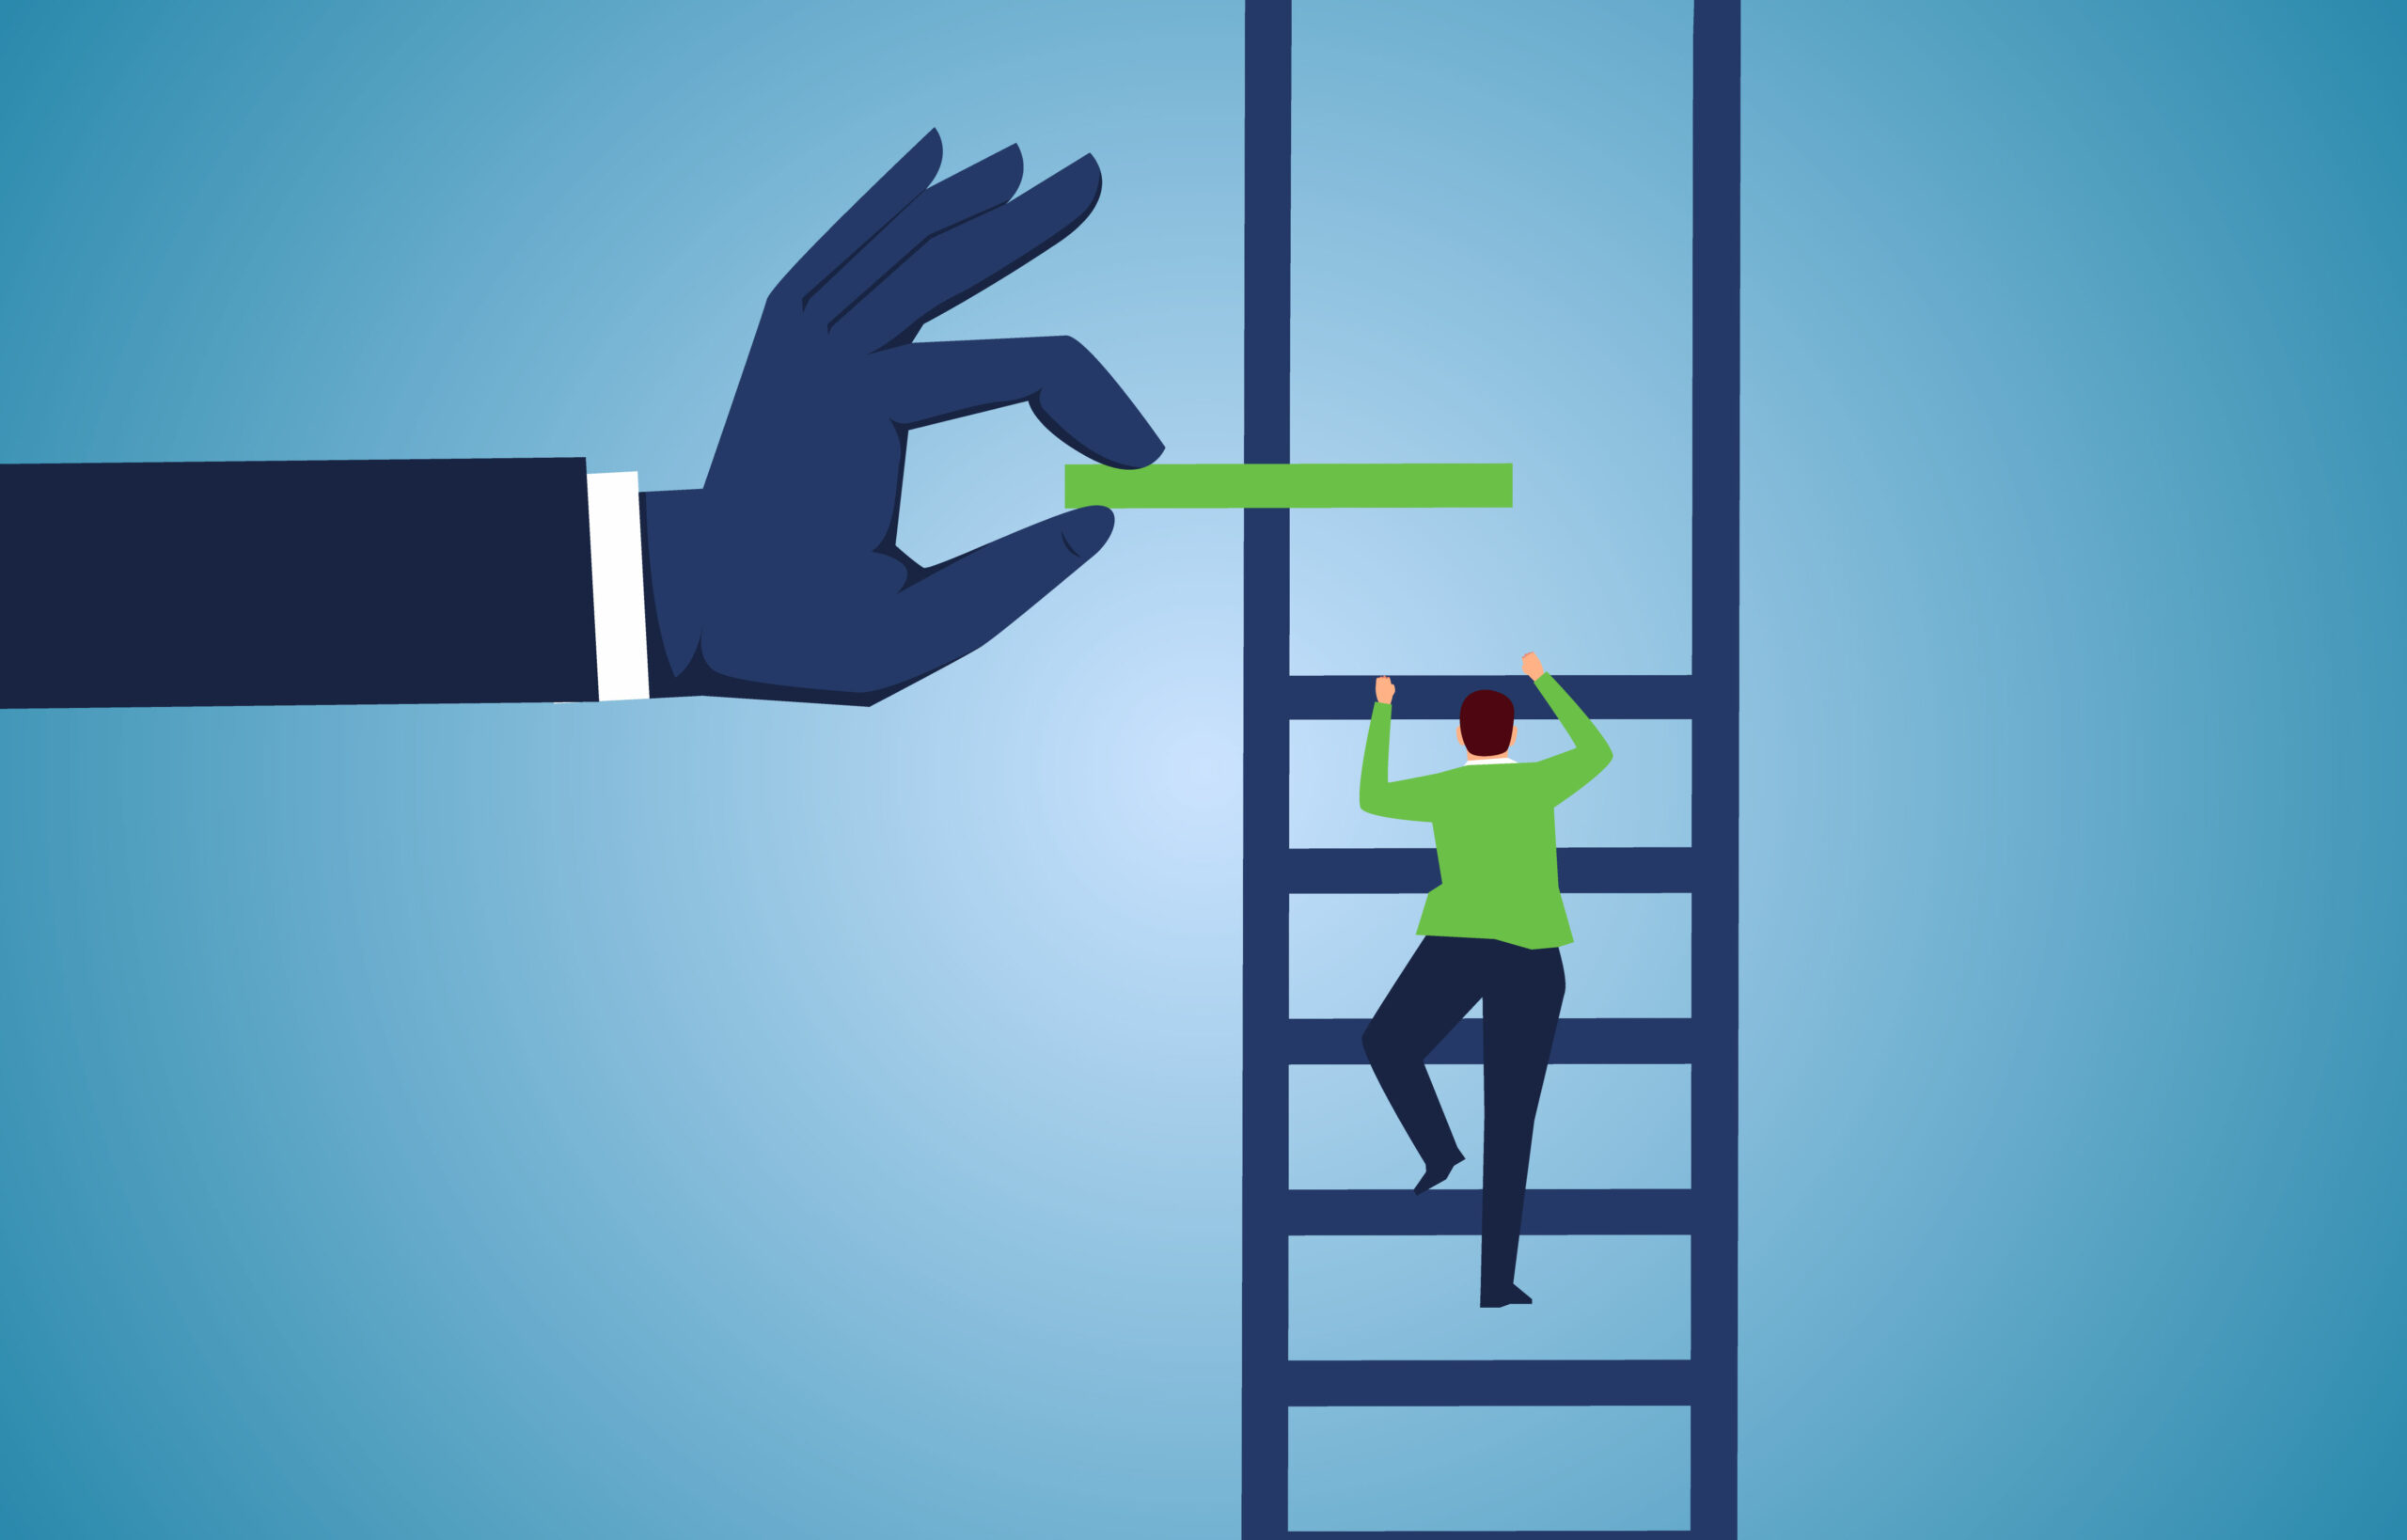 Climbing a ladder with the next rung provided by a large hand, symbolizing support and progression in personal or professional growth.